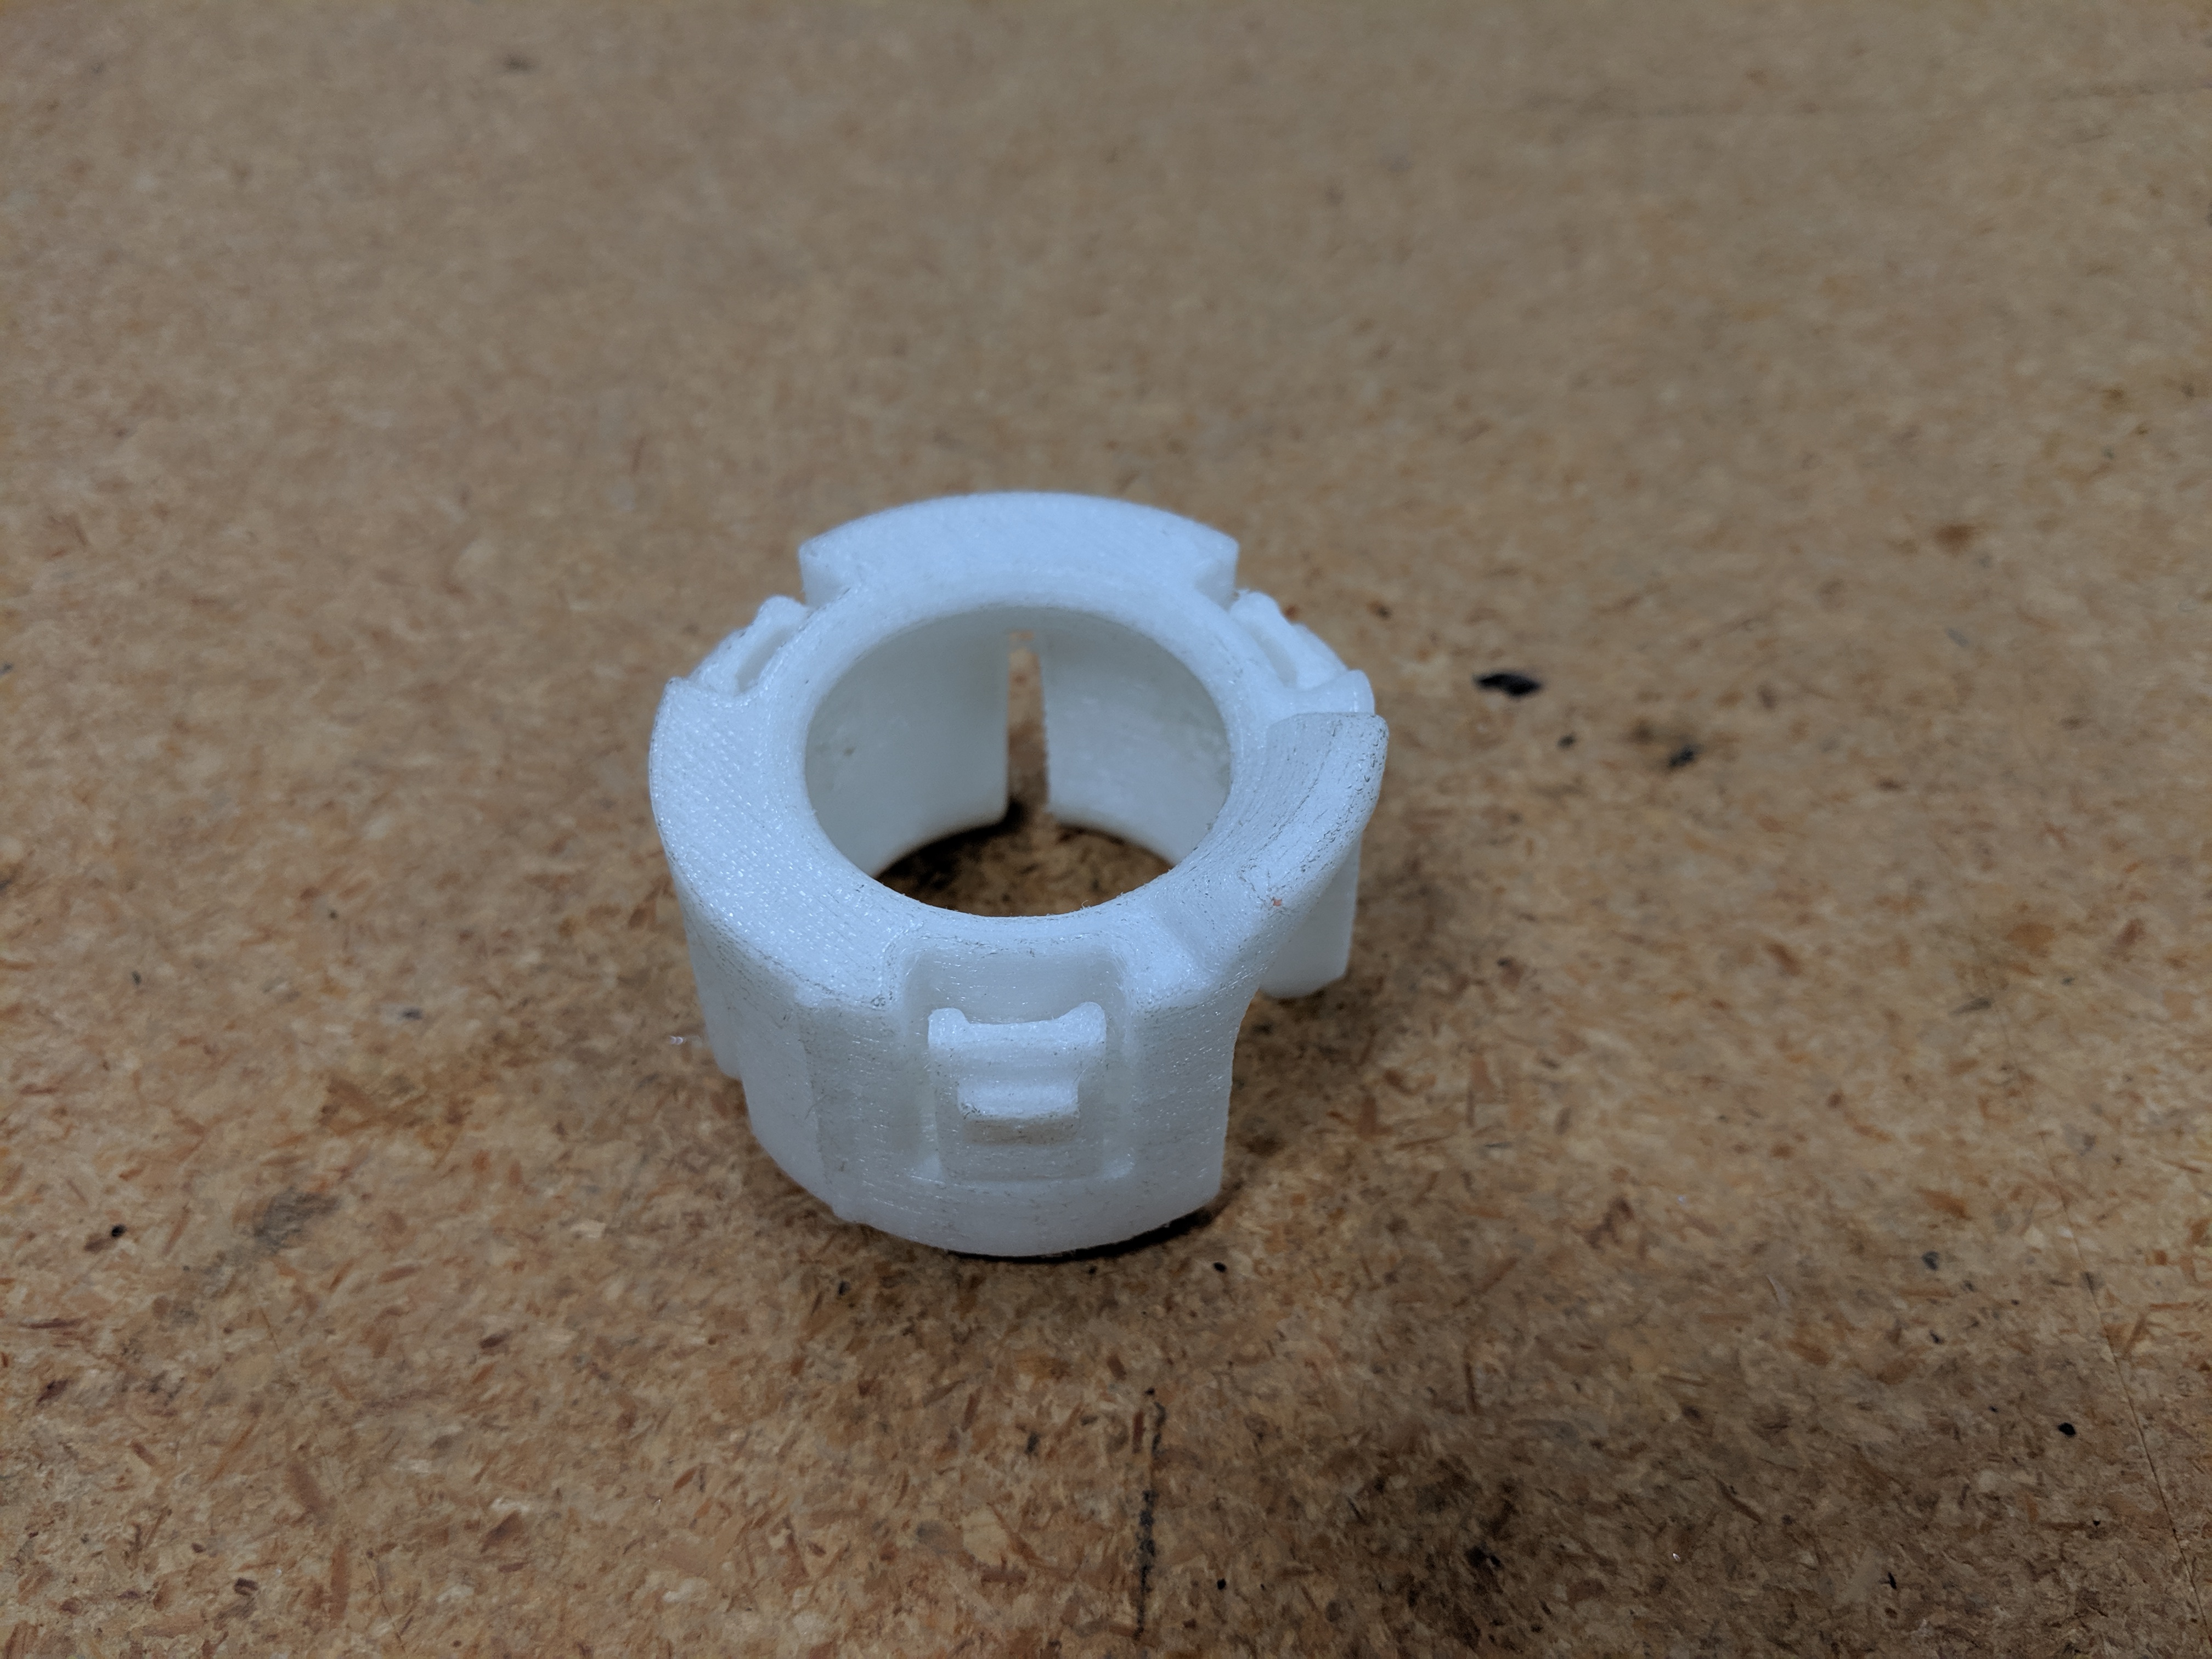 Our 3D printed clip.